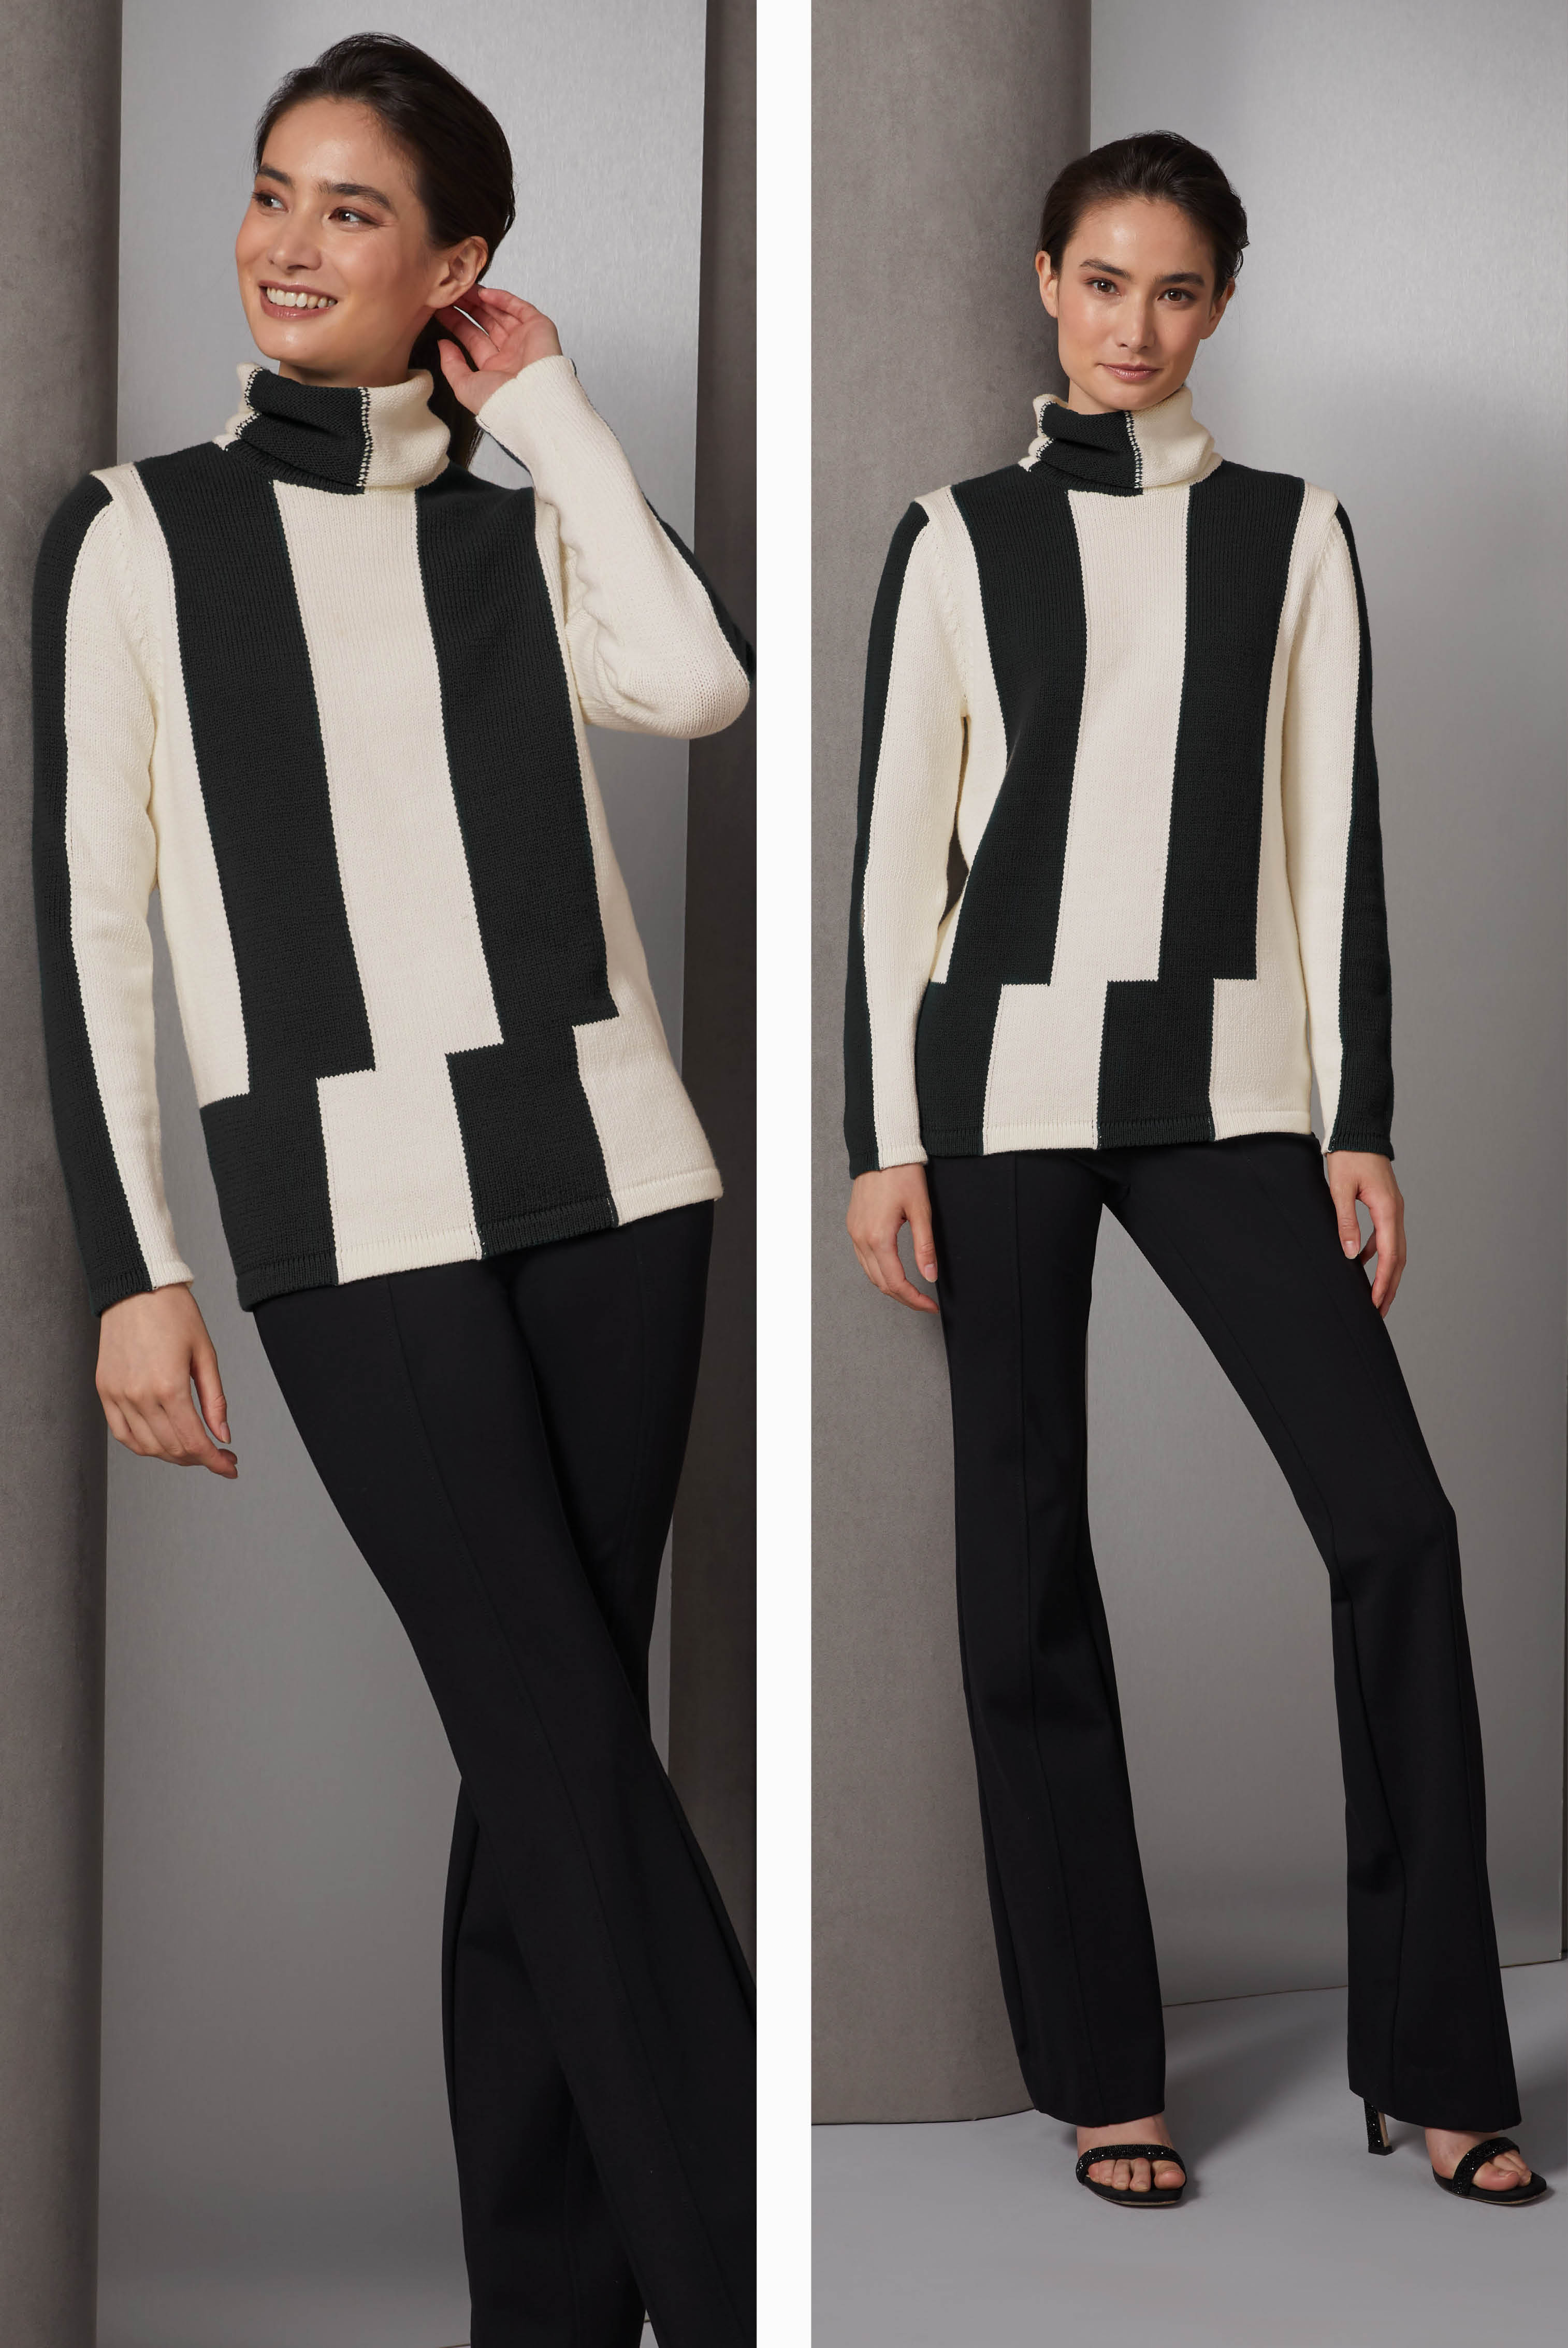 This slouchy turtleneck ensemble has downtown flair. The creamy tapioca and black organic cotton yarns in a chic staggered intarsia achieve an Op Art effect that dazzles the eye.